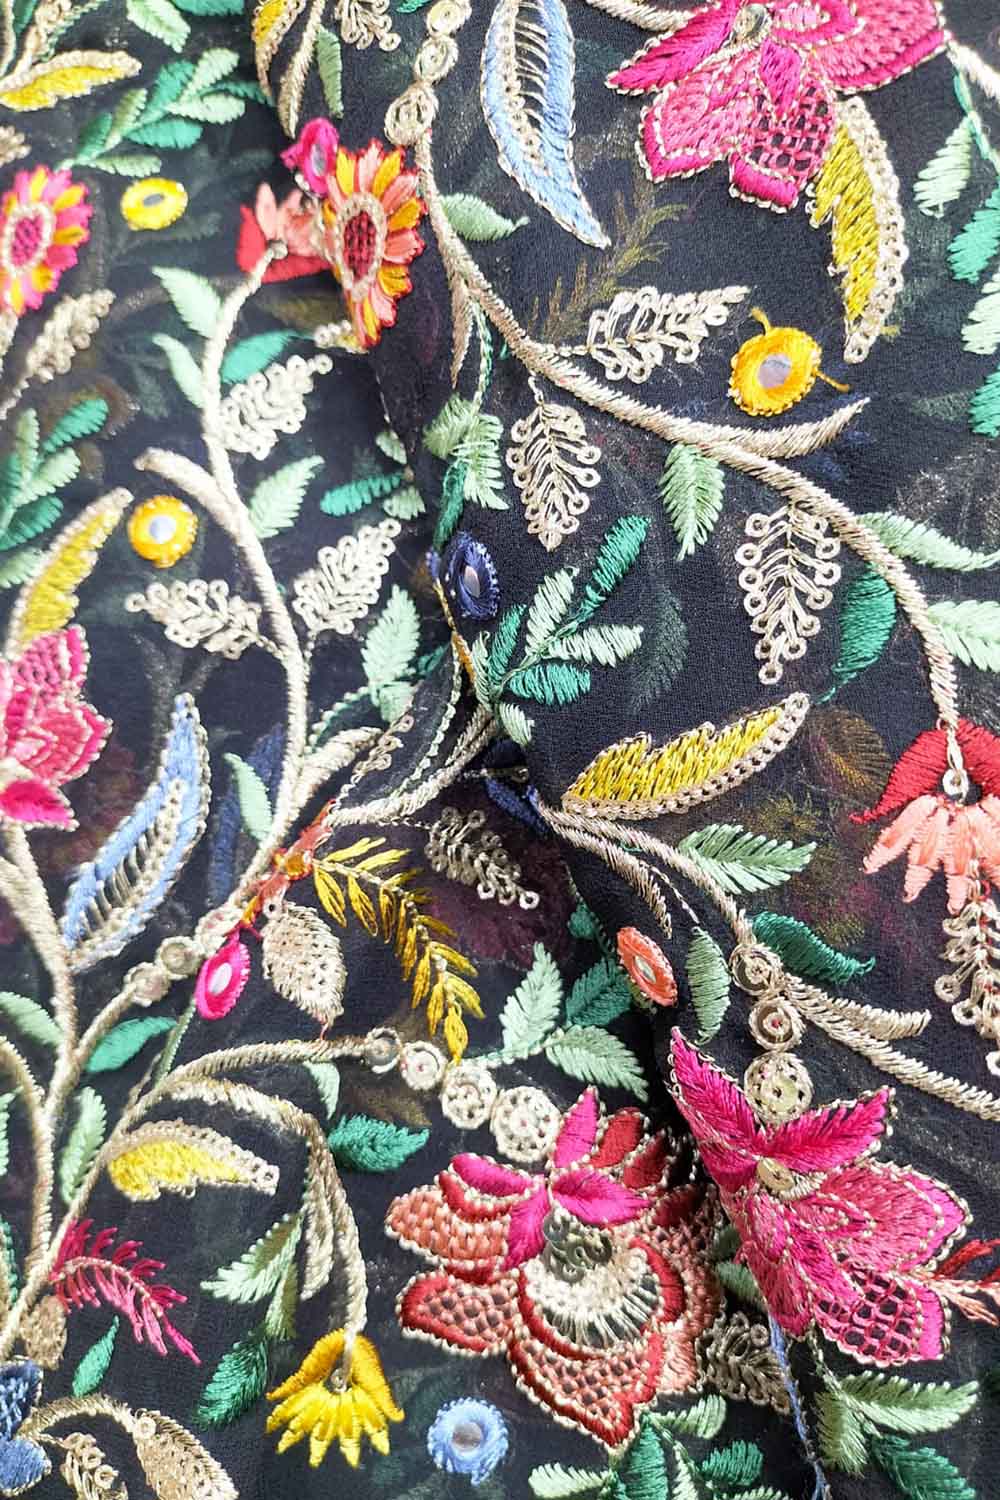 Fabric-diy Embroidery Fabrice Cloth-fabric for Needlework and Craft Cotton  Fabric Cotton Linen Fabric-needlework Cloth -  Israel